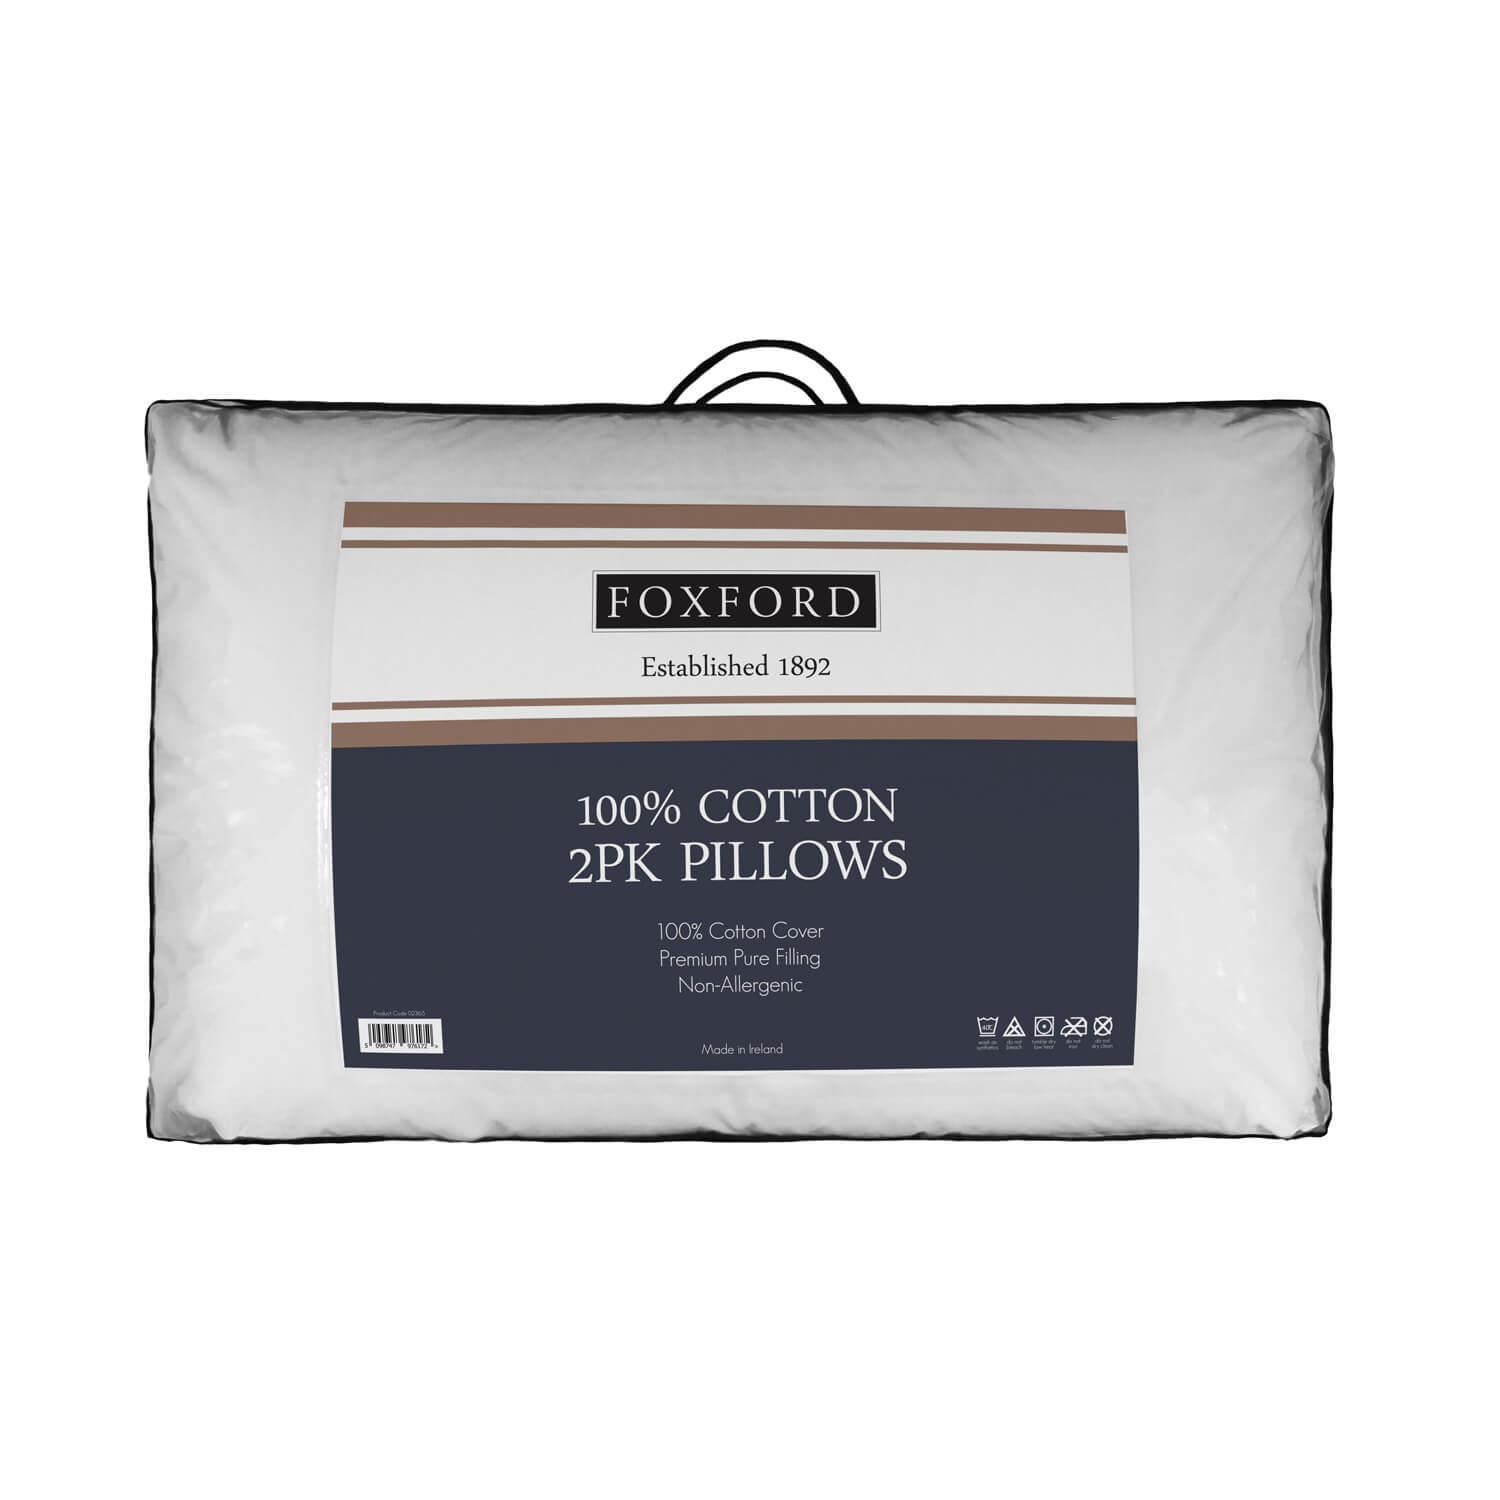 Foxford Luxury Cotton Pillow 2 Pack 1 Shaws Department Stores